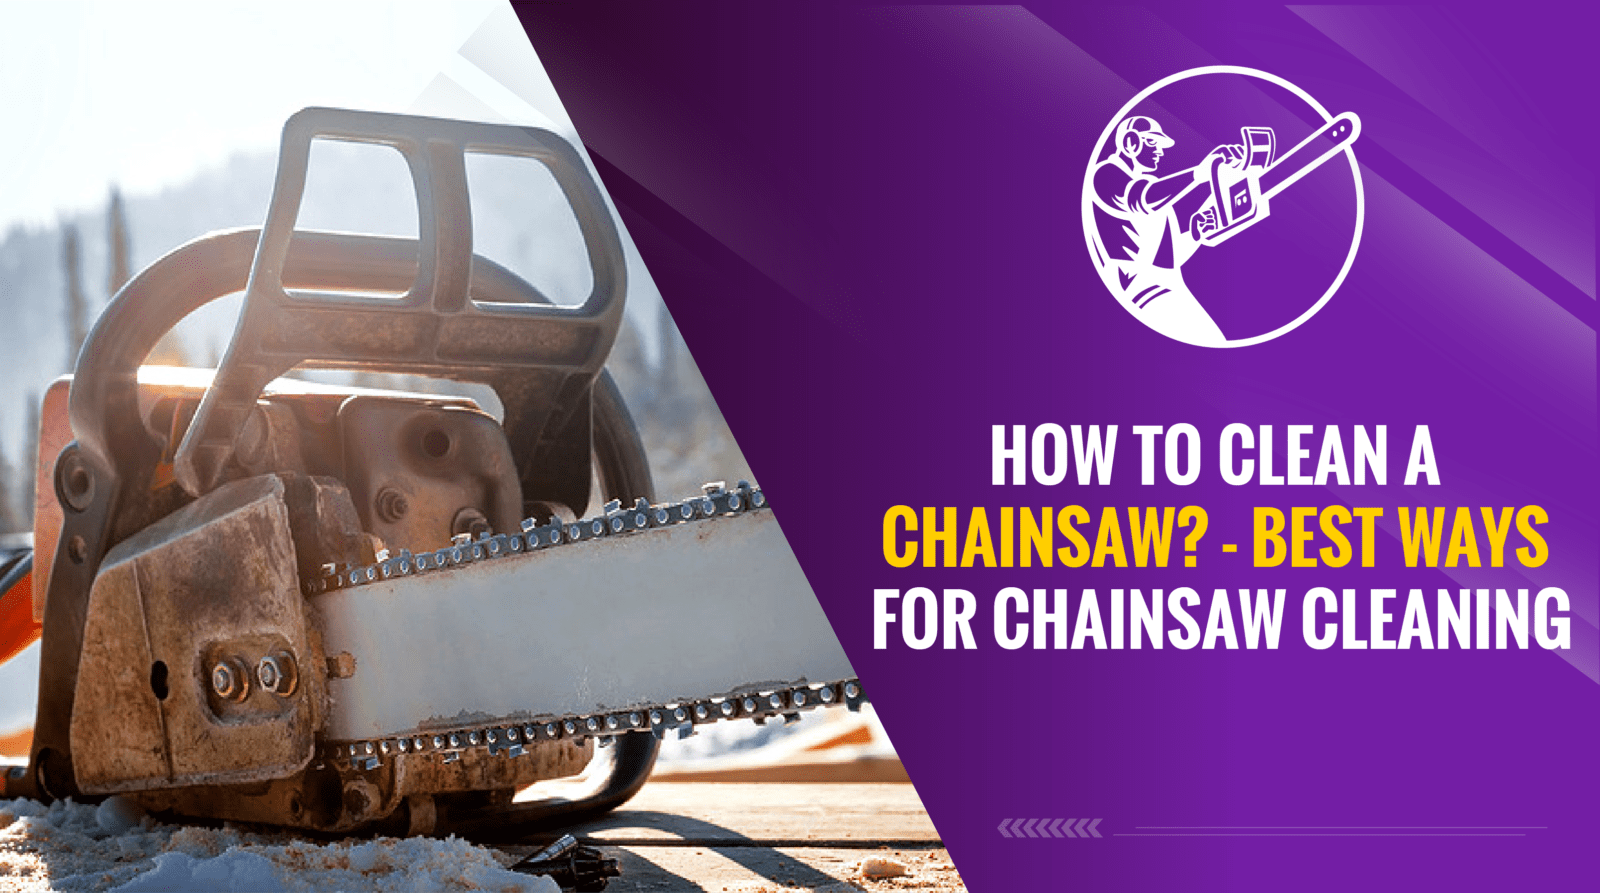 How to Clean a Chainsaw - Best Ways For Chainsaw Cleaning